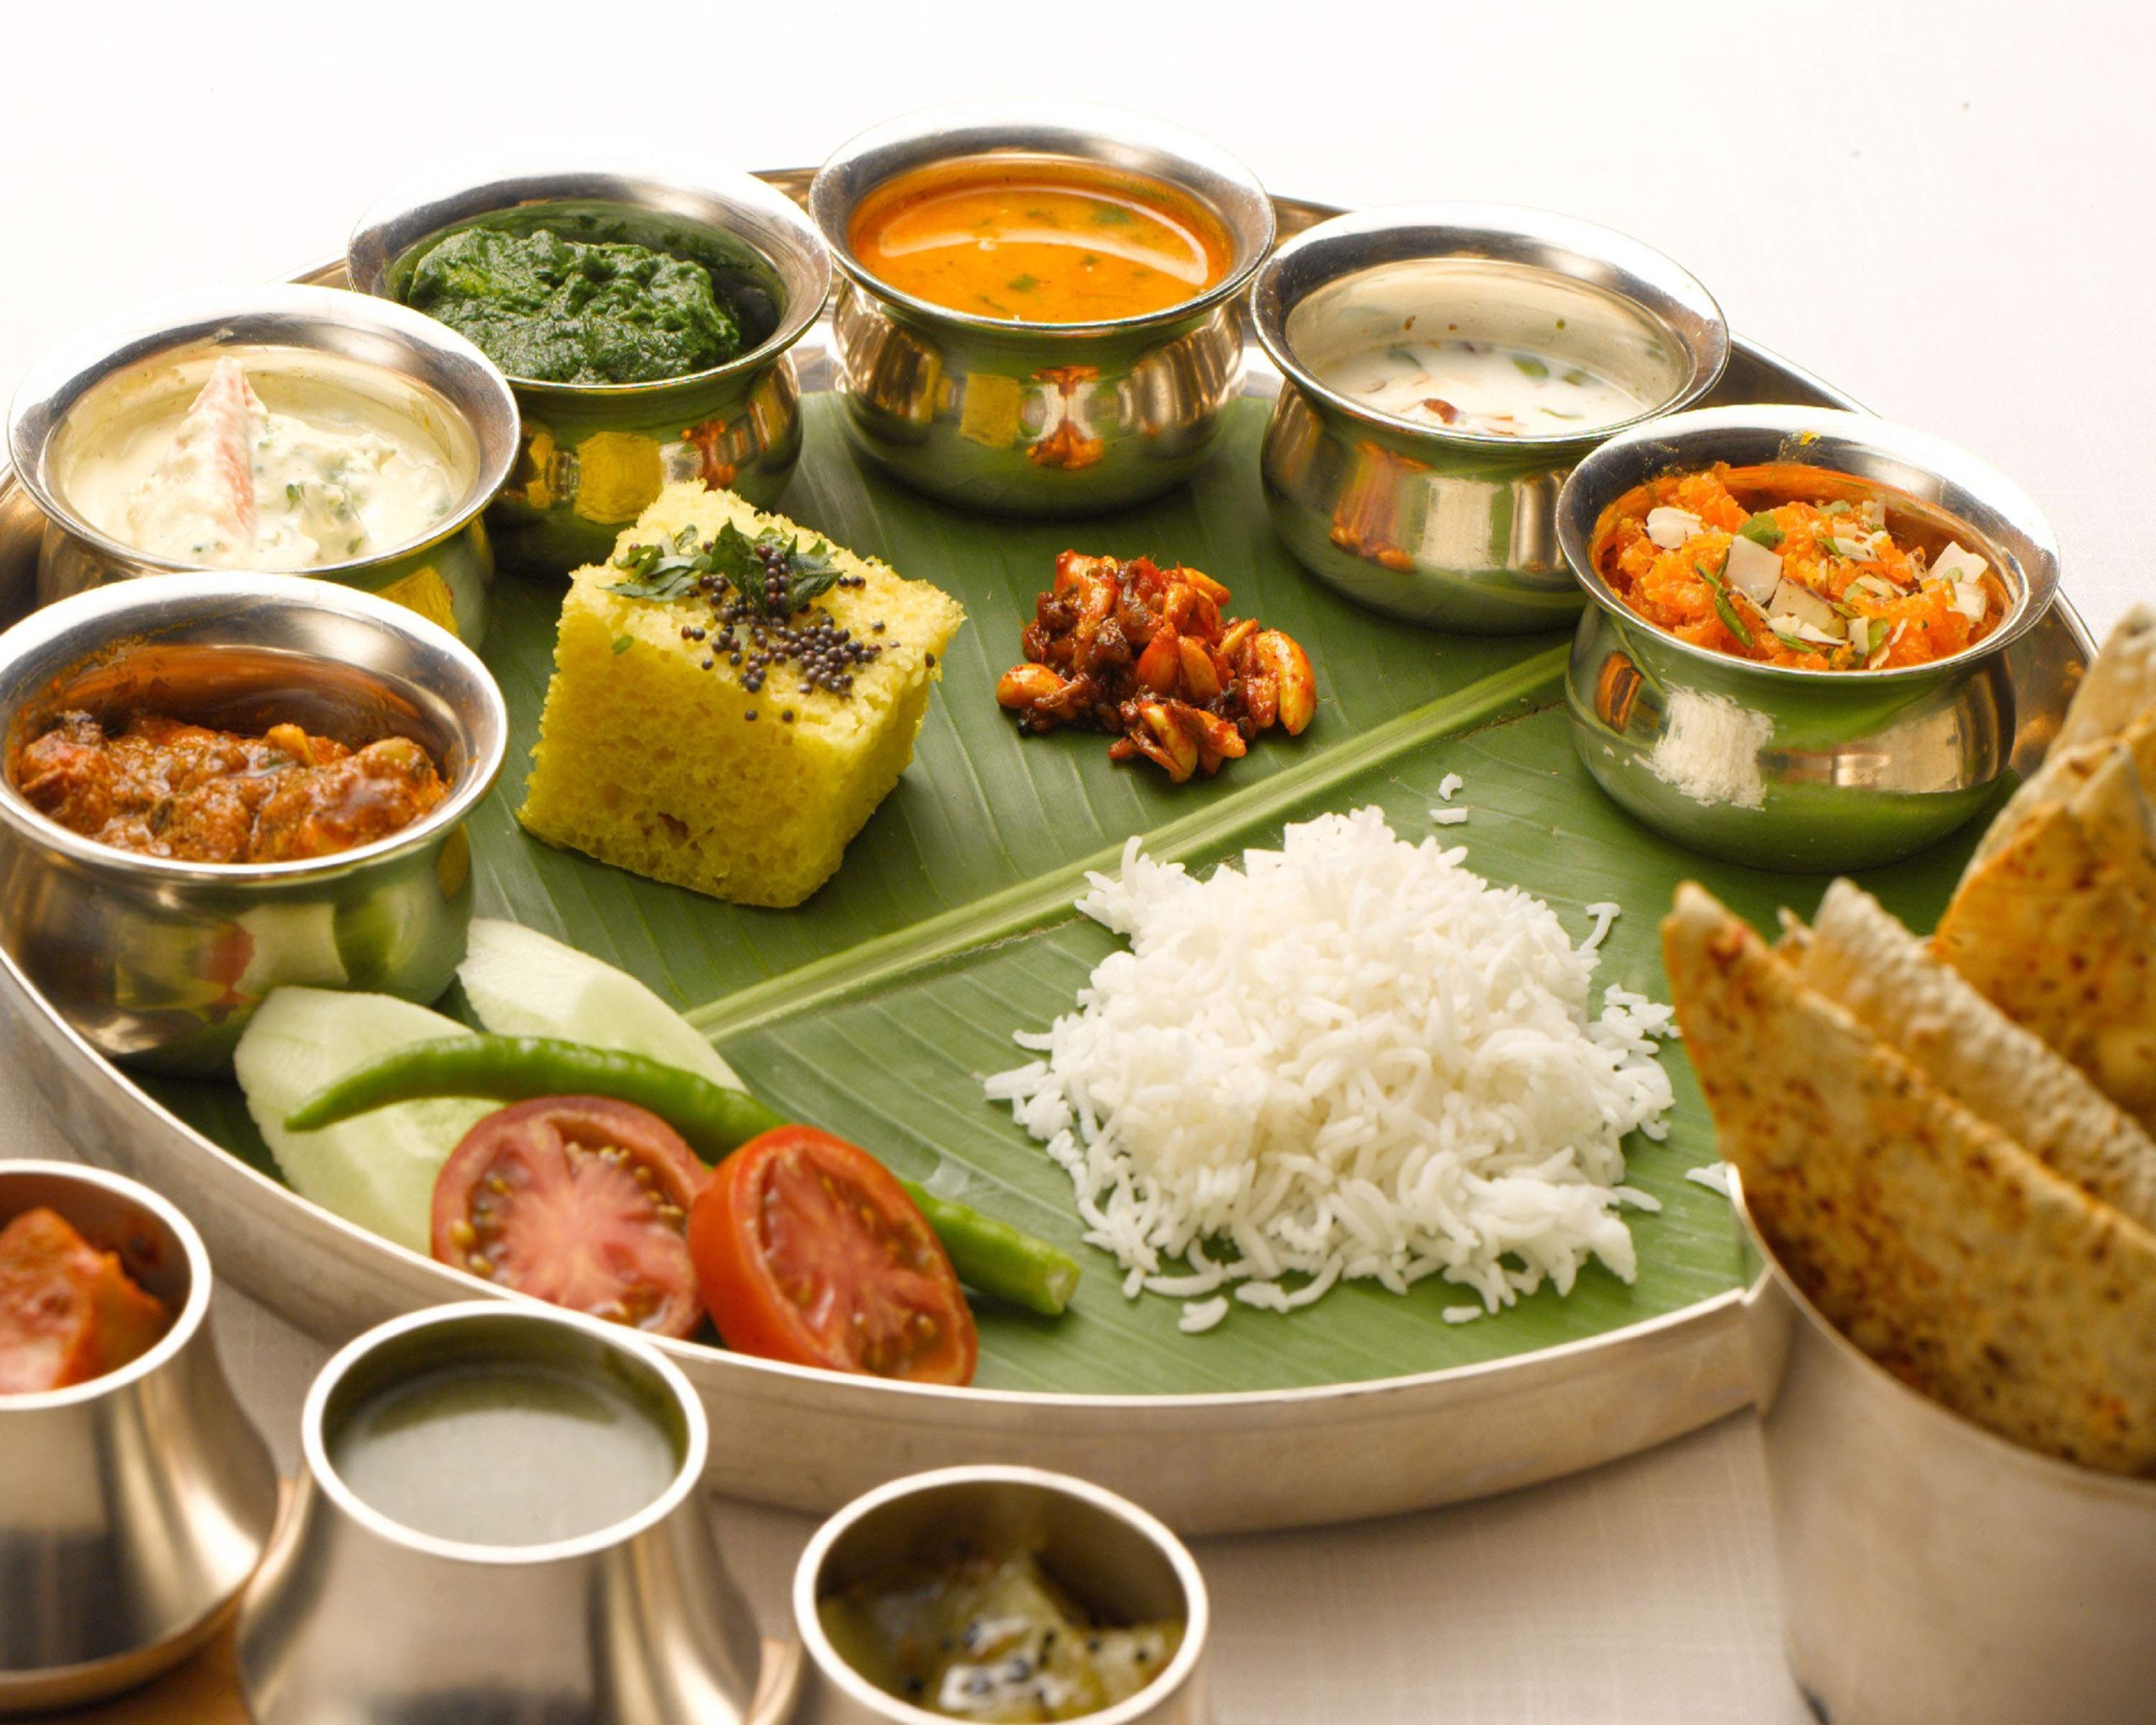 How Location Has Shaped Indian Cuisine